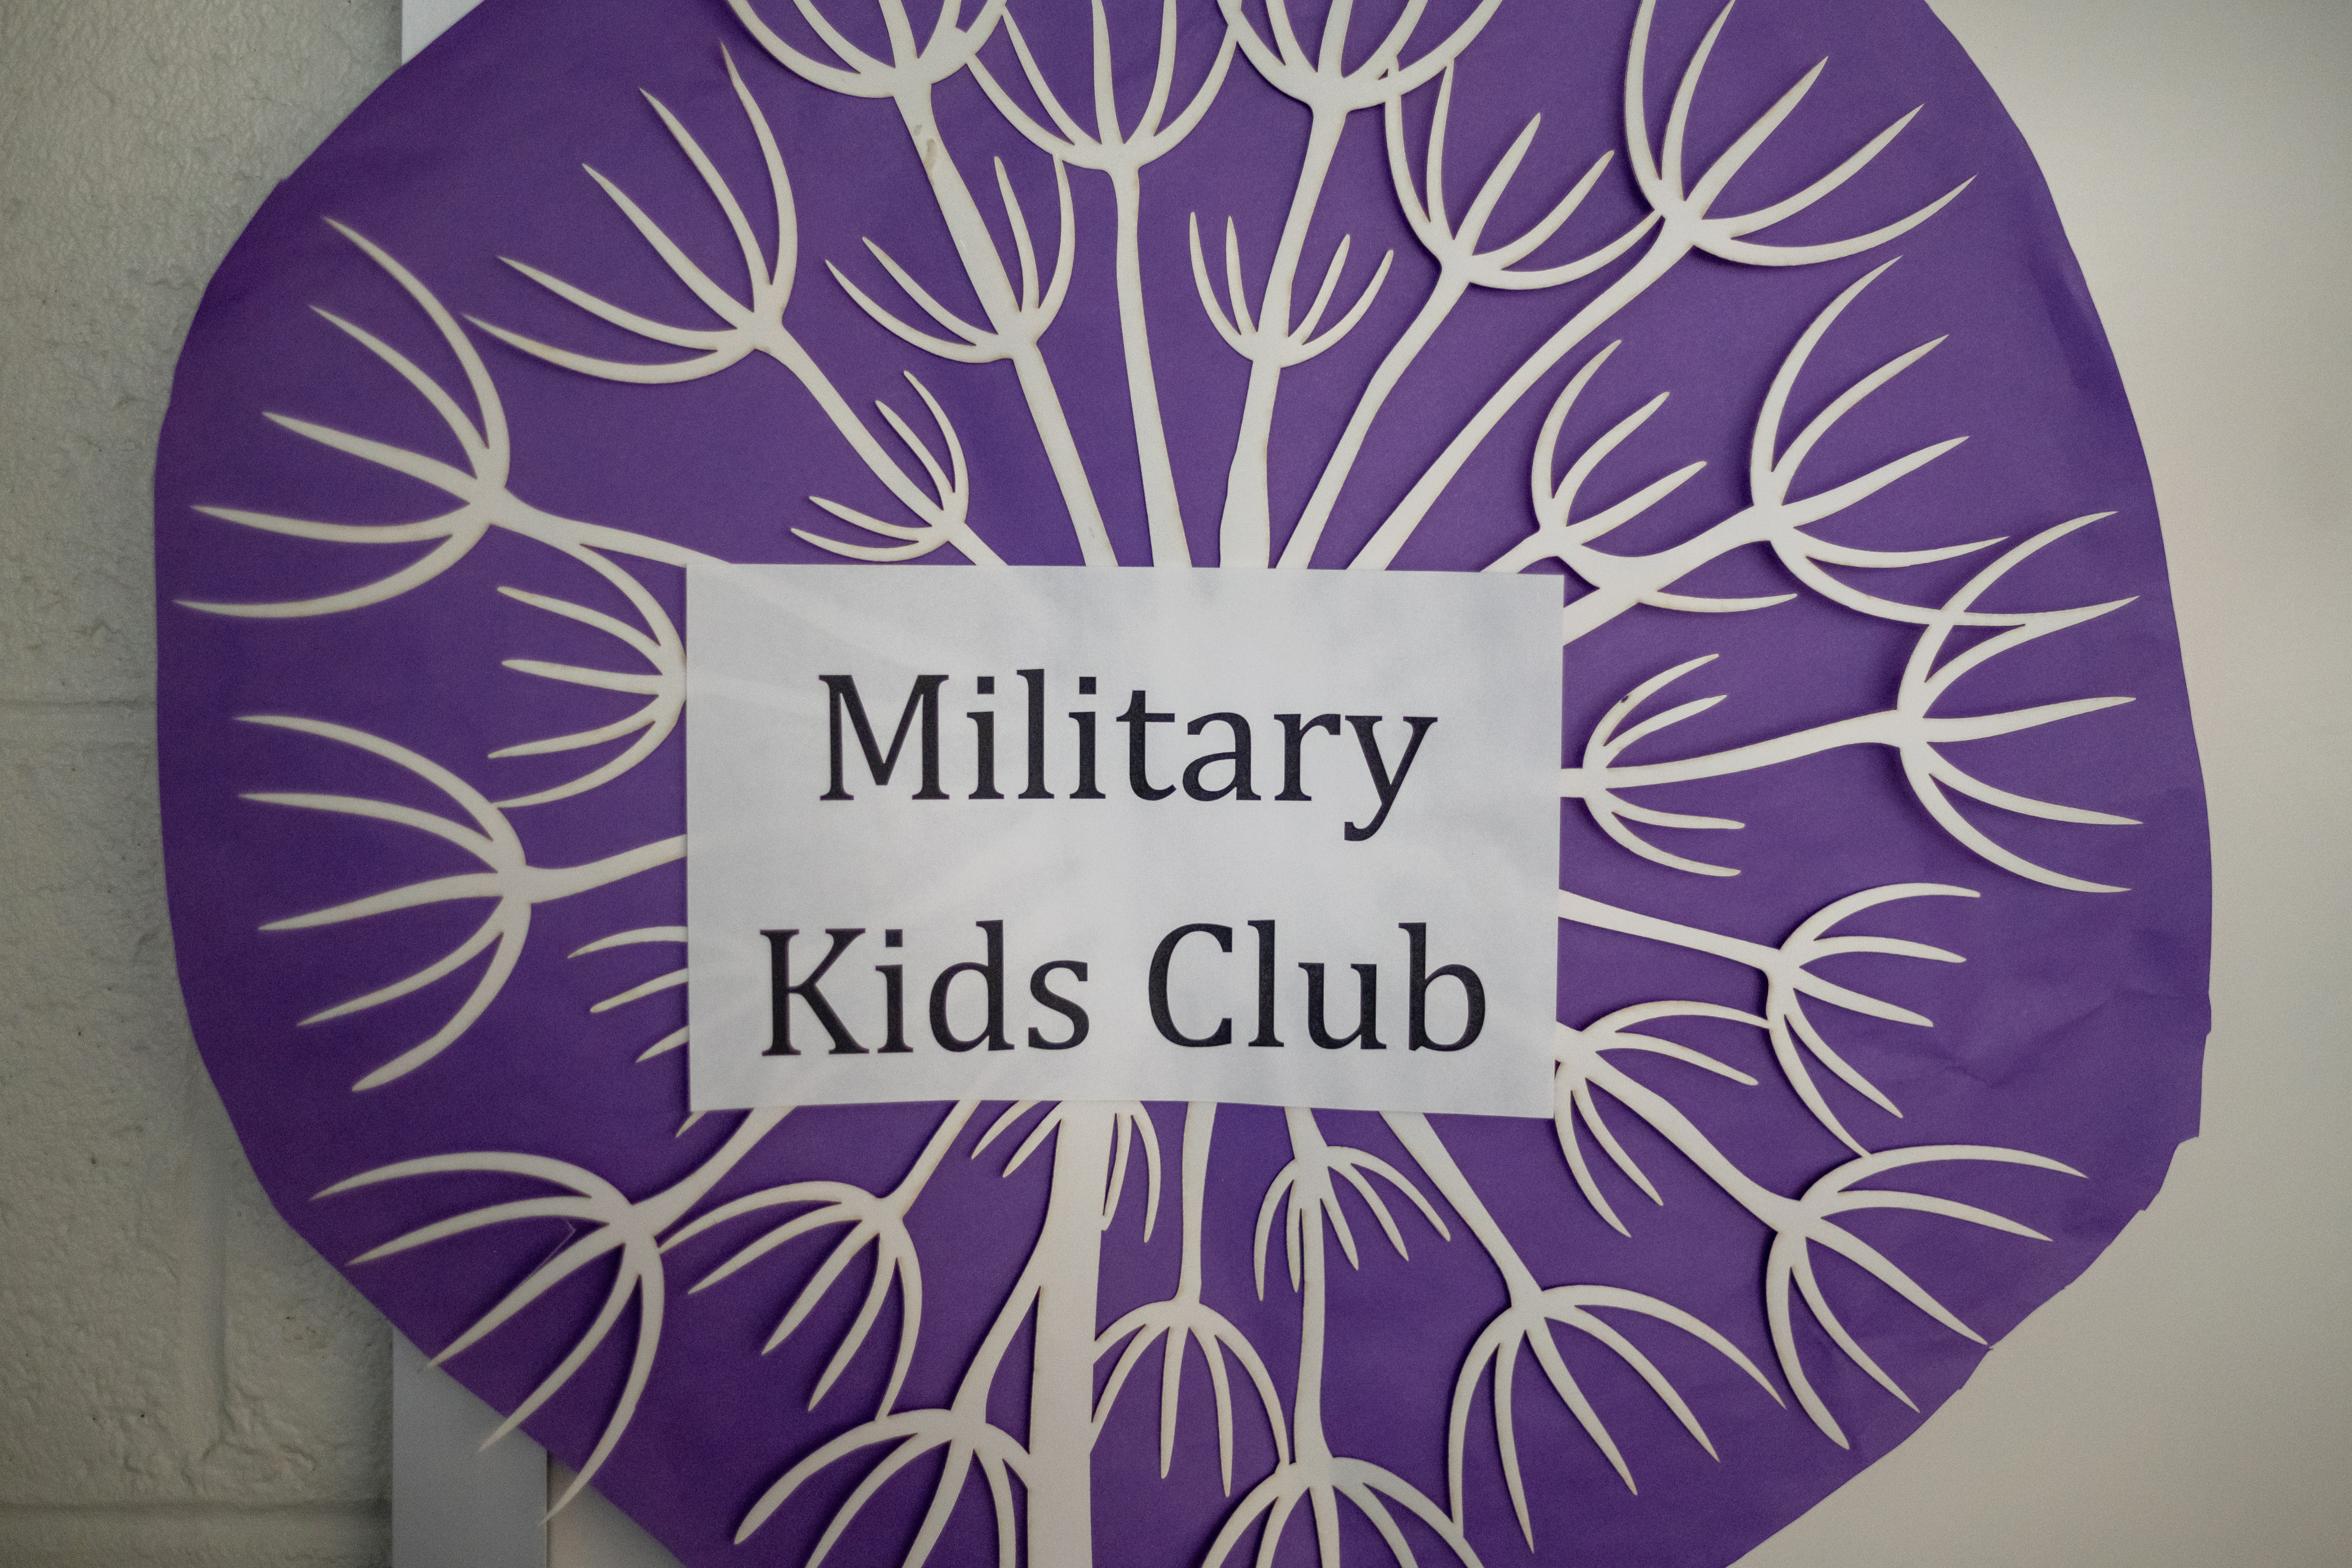 A Military Kids Club sign at Clermont Elementary.